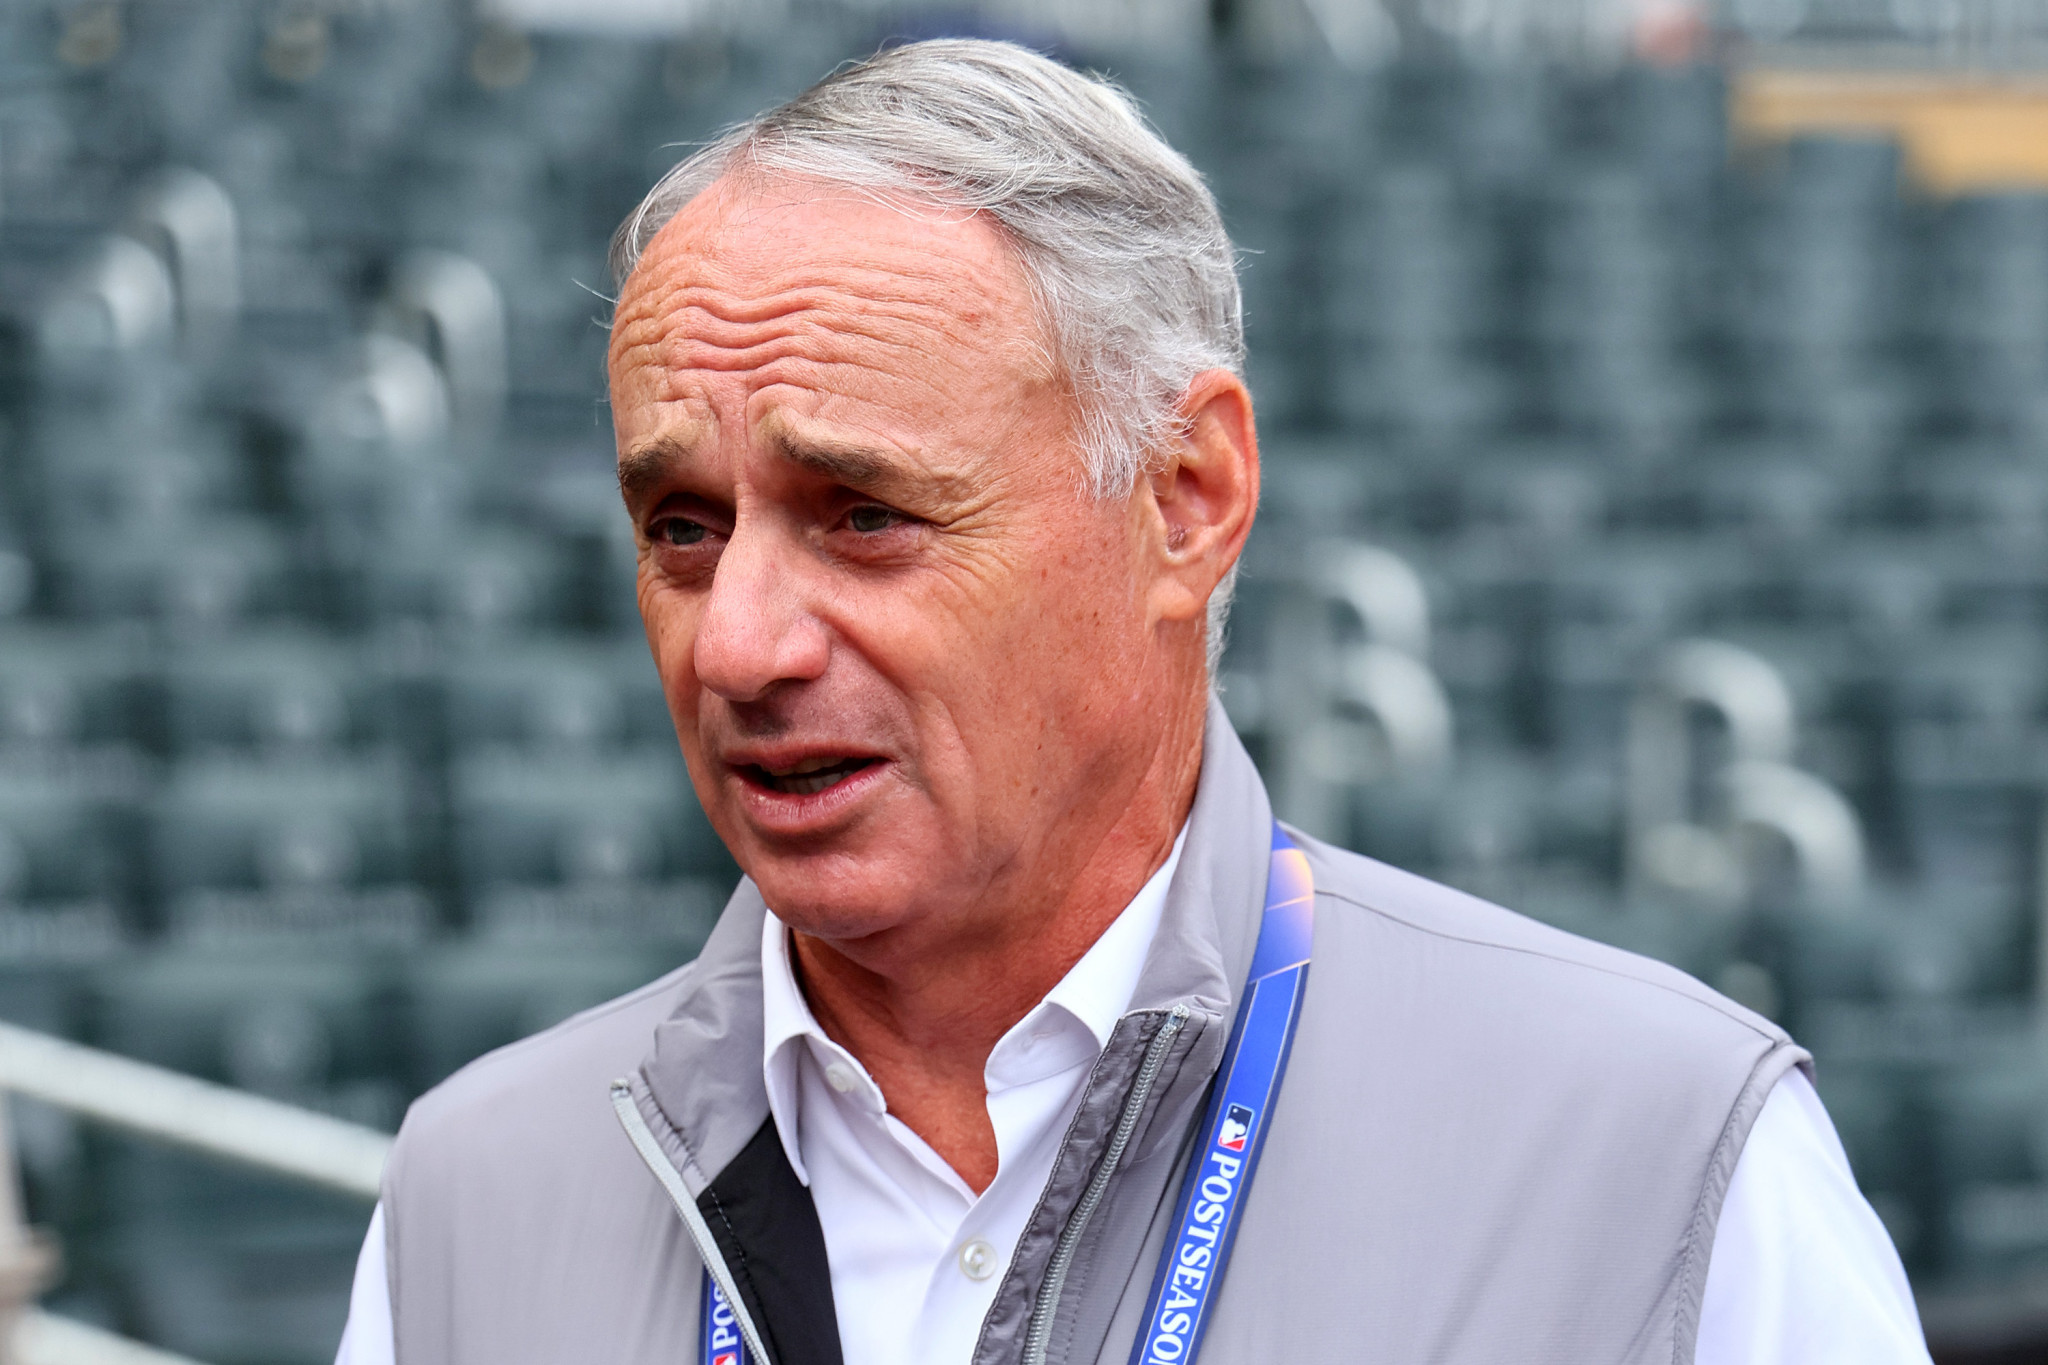 MLB commissioner Rob Manfred has played down the prospect of a mid-season pause for the Los Angeles 2028 Olympics ©Getty Images